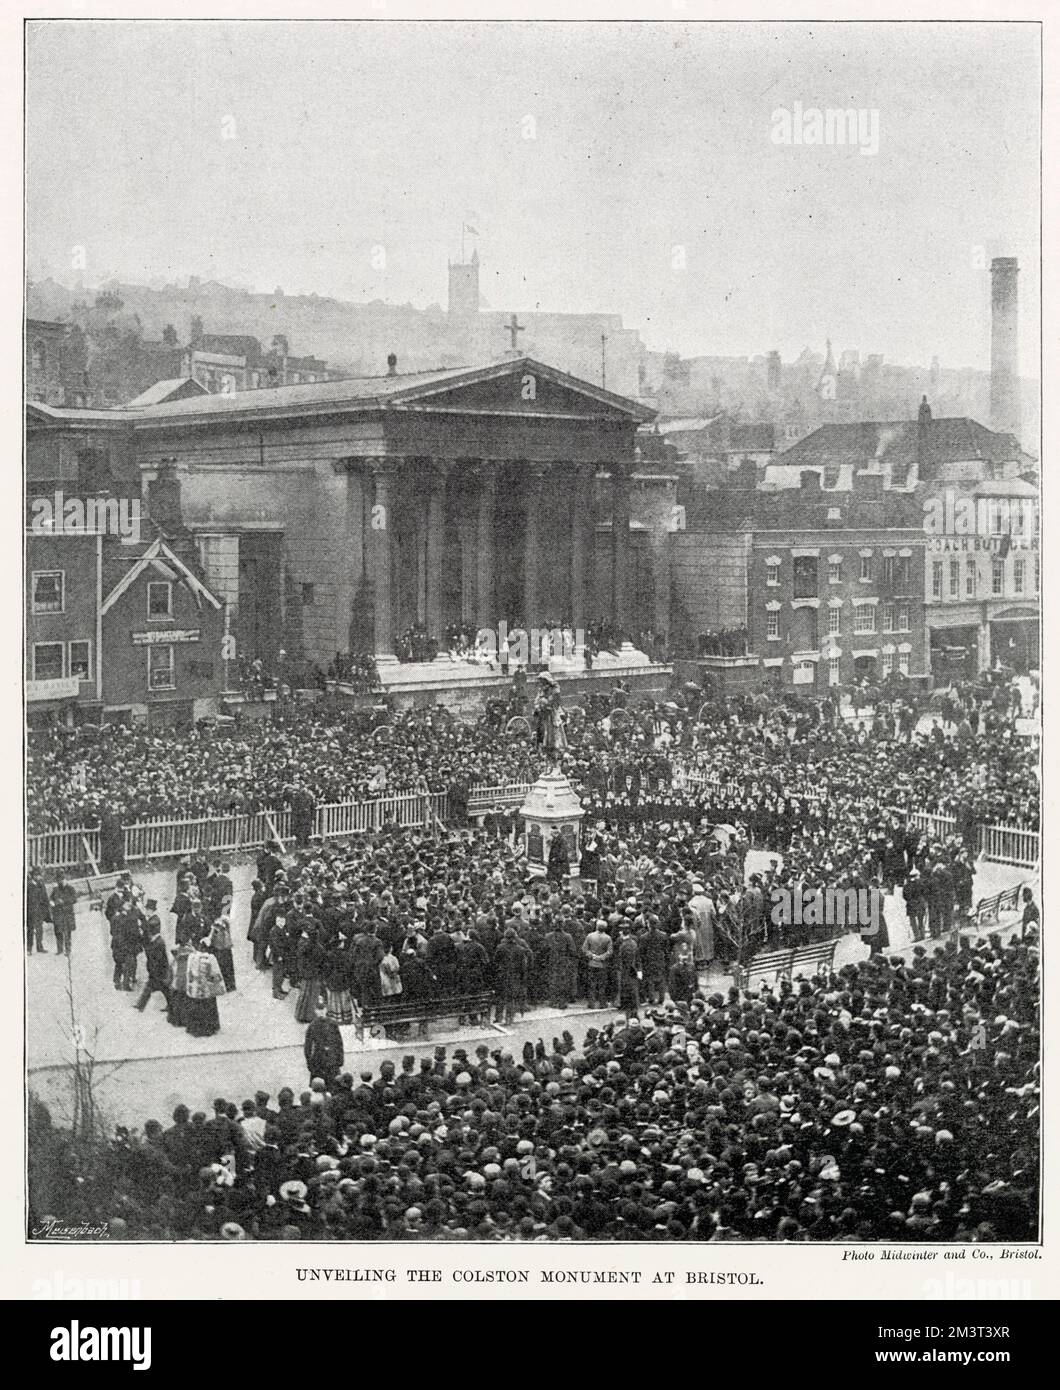 Unveiling in Bristol on 16 November 1895, of the monument to Edward Colston, merchant and MP, by Irish sculptor, John Cassidy. Colston was a well-known benefactor of the city  but the statue was pulled down by protestors on 7 June 2020 during Black Lives Matter demonstrations, because of Colston's involvement with the slave trade.     Date: 1895 Stock Photo